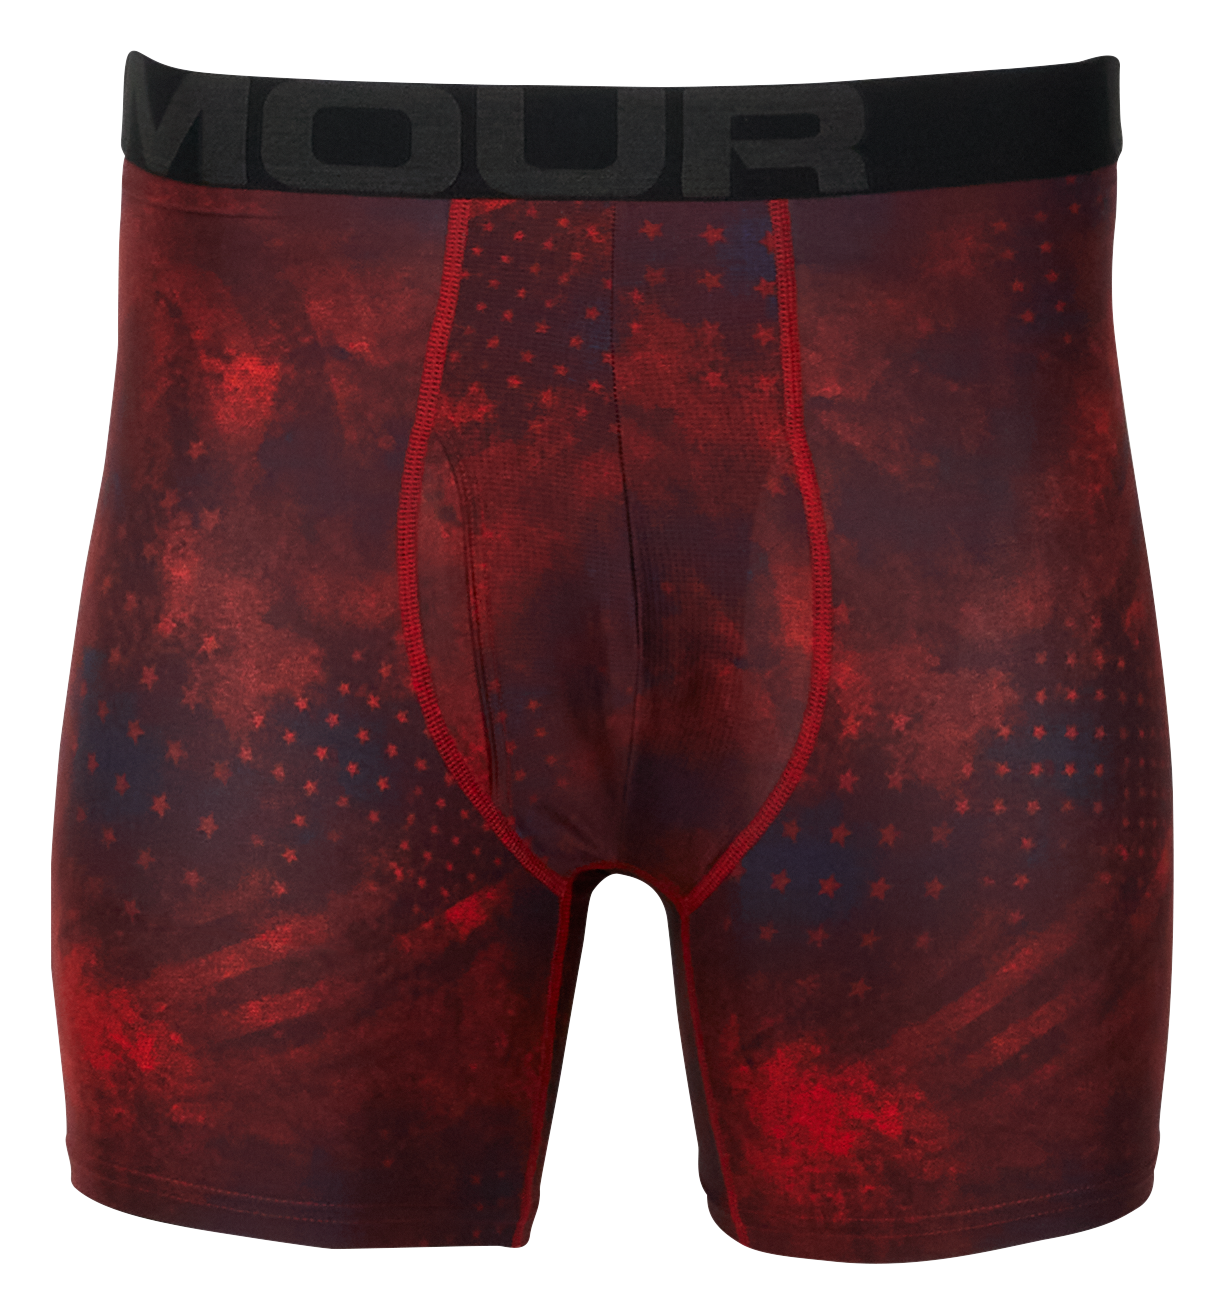 Under Armour Tech 6"" Patterned Boxerjock Shorts for Men - Red/Jet Gray - XL